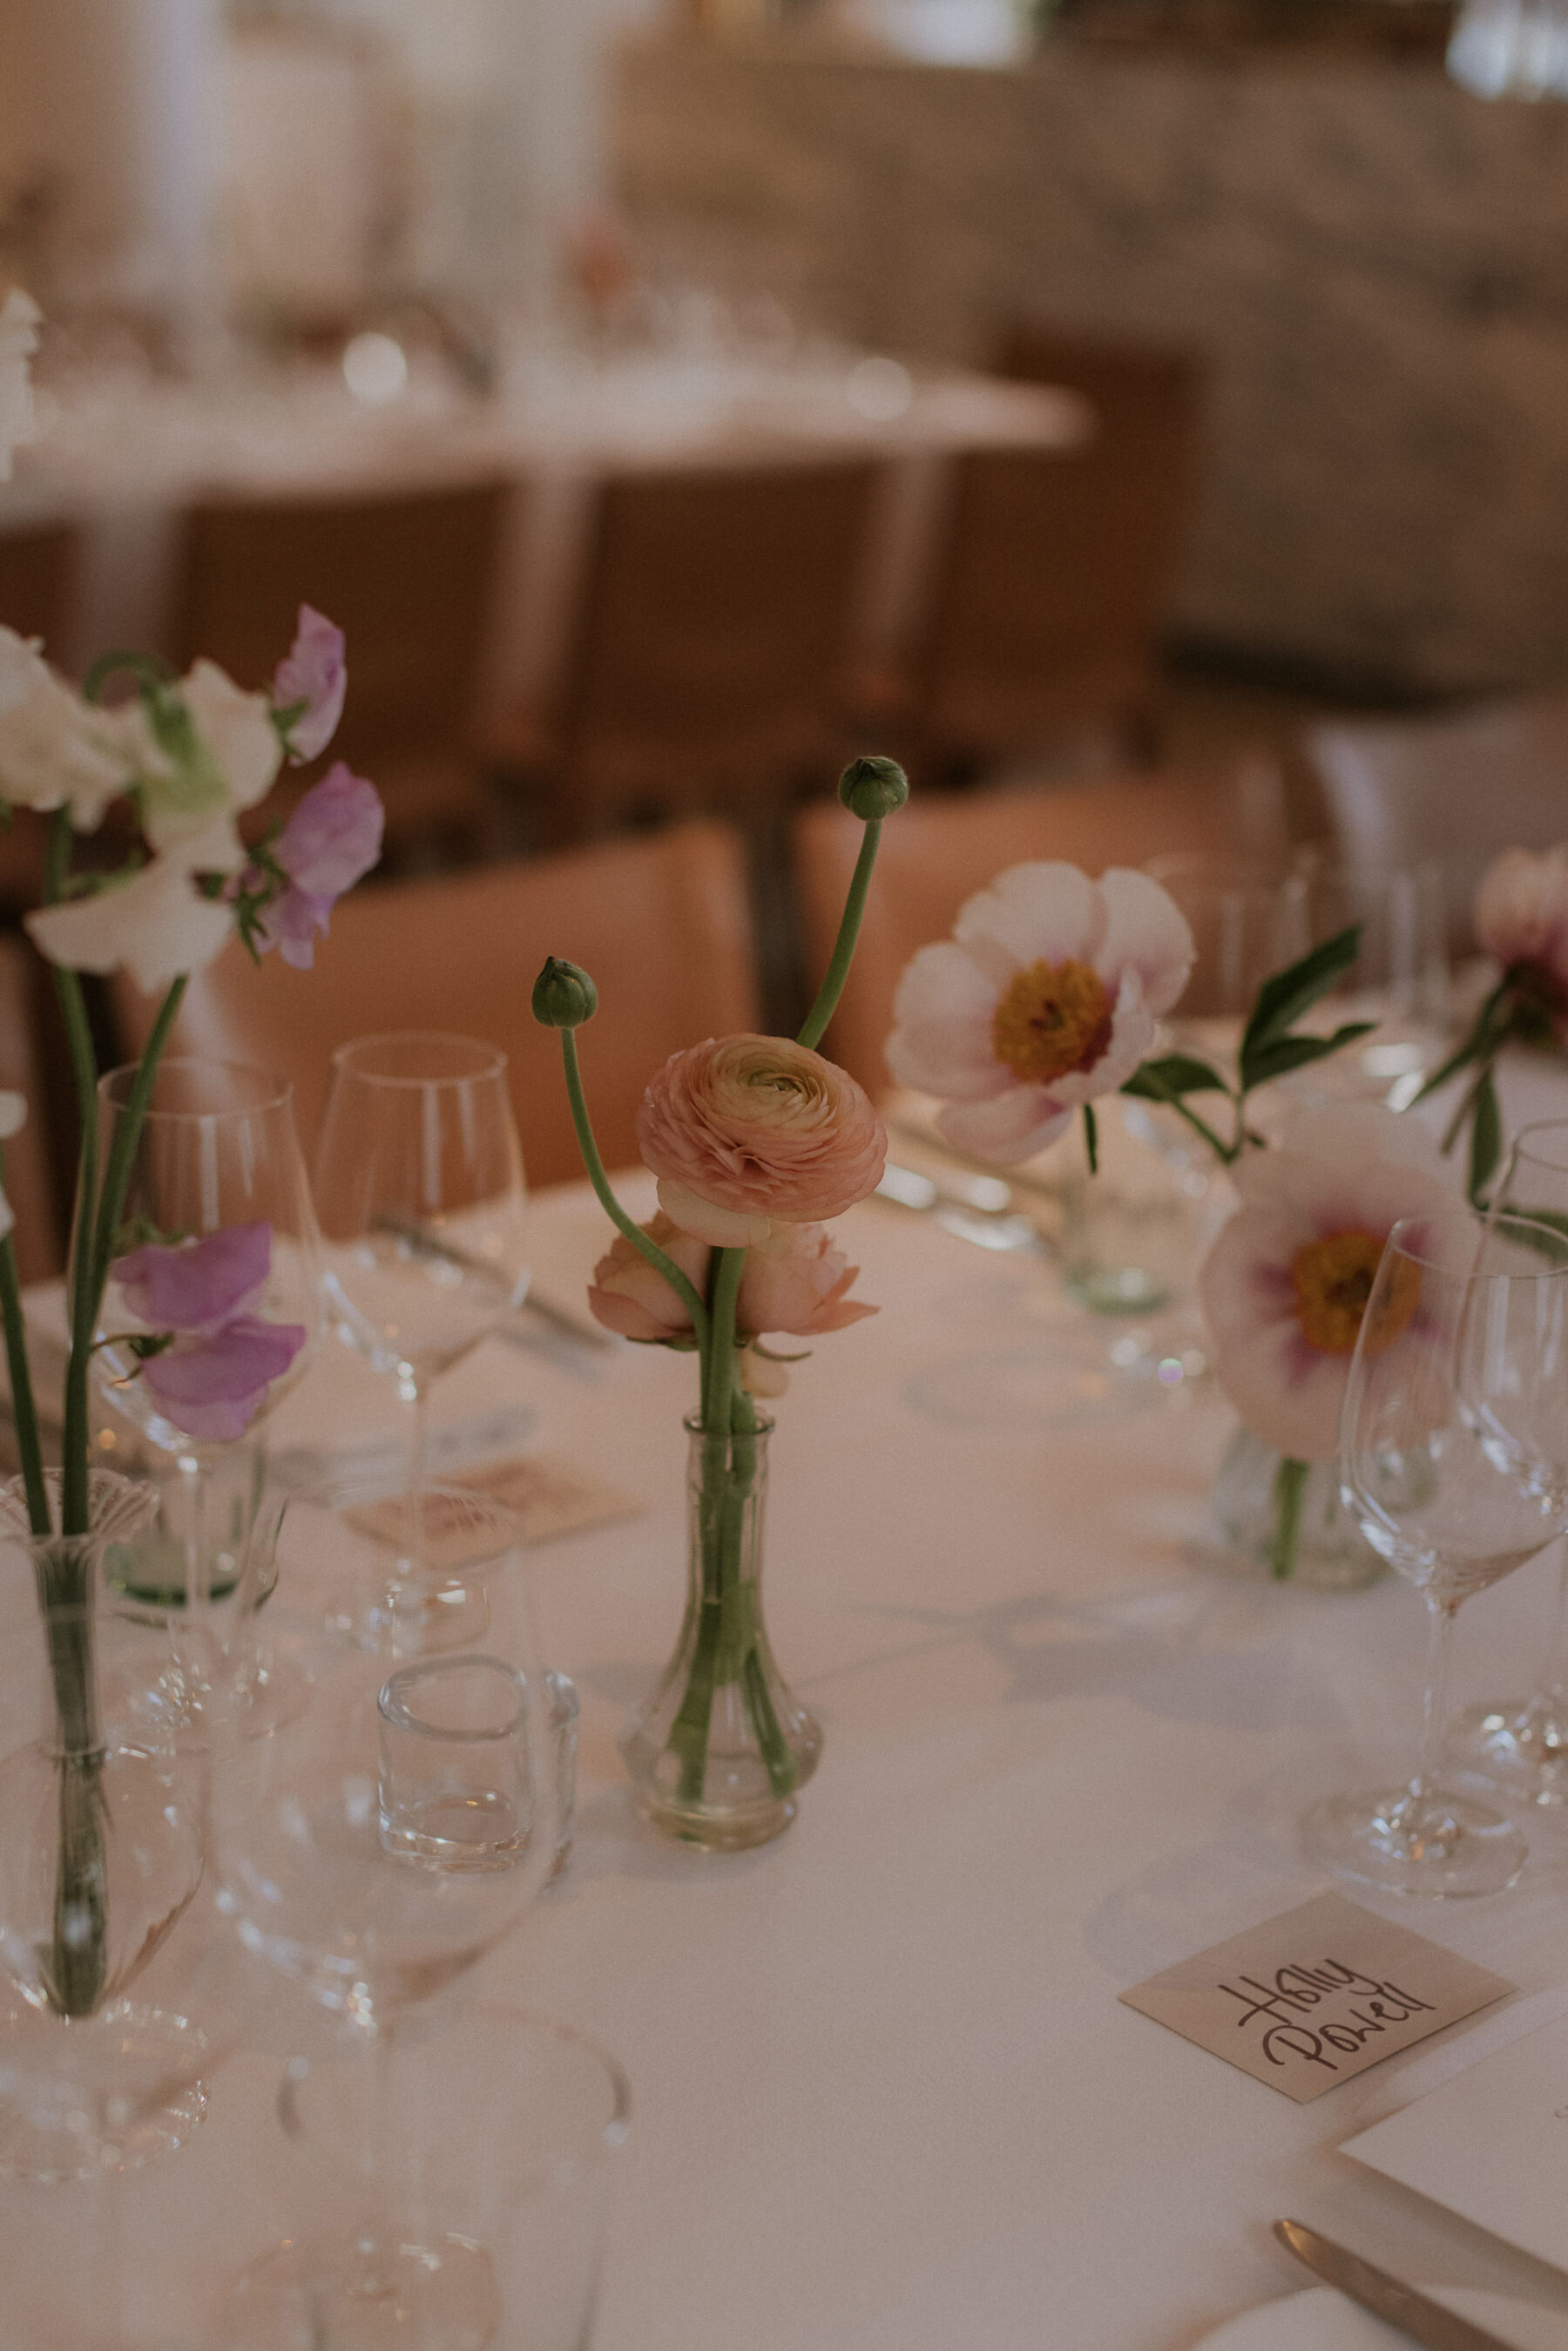 Simple spring wedding flowers in bud vases. Maja Tsolo Photography.